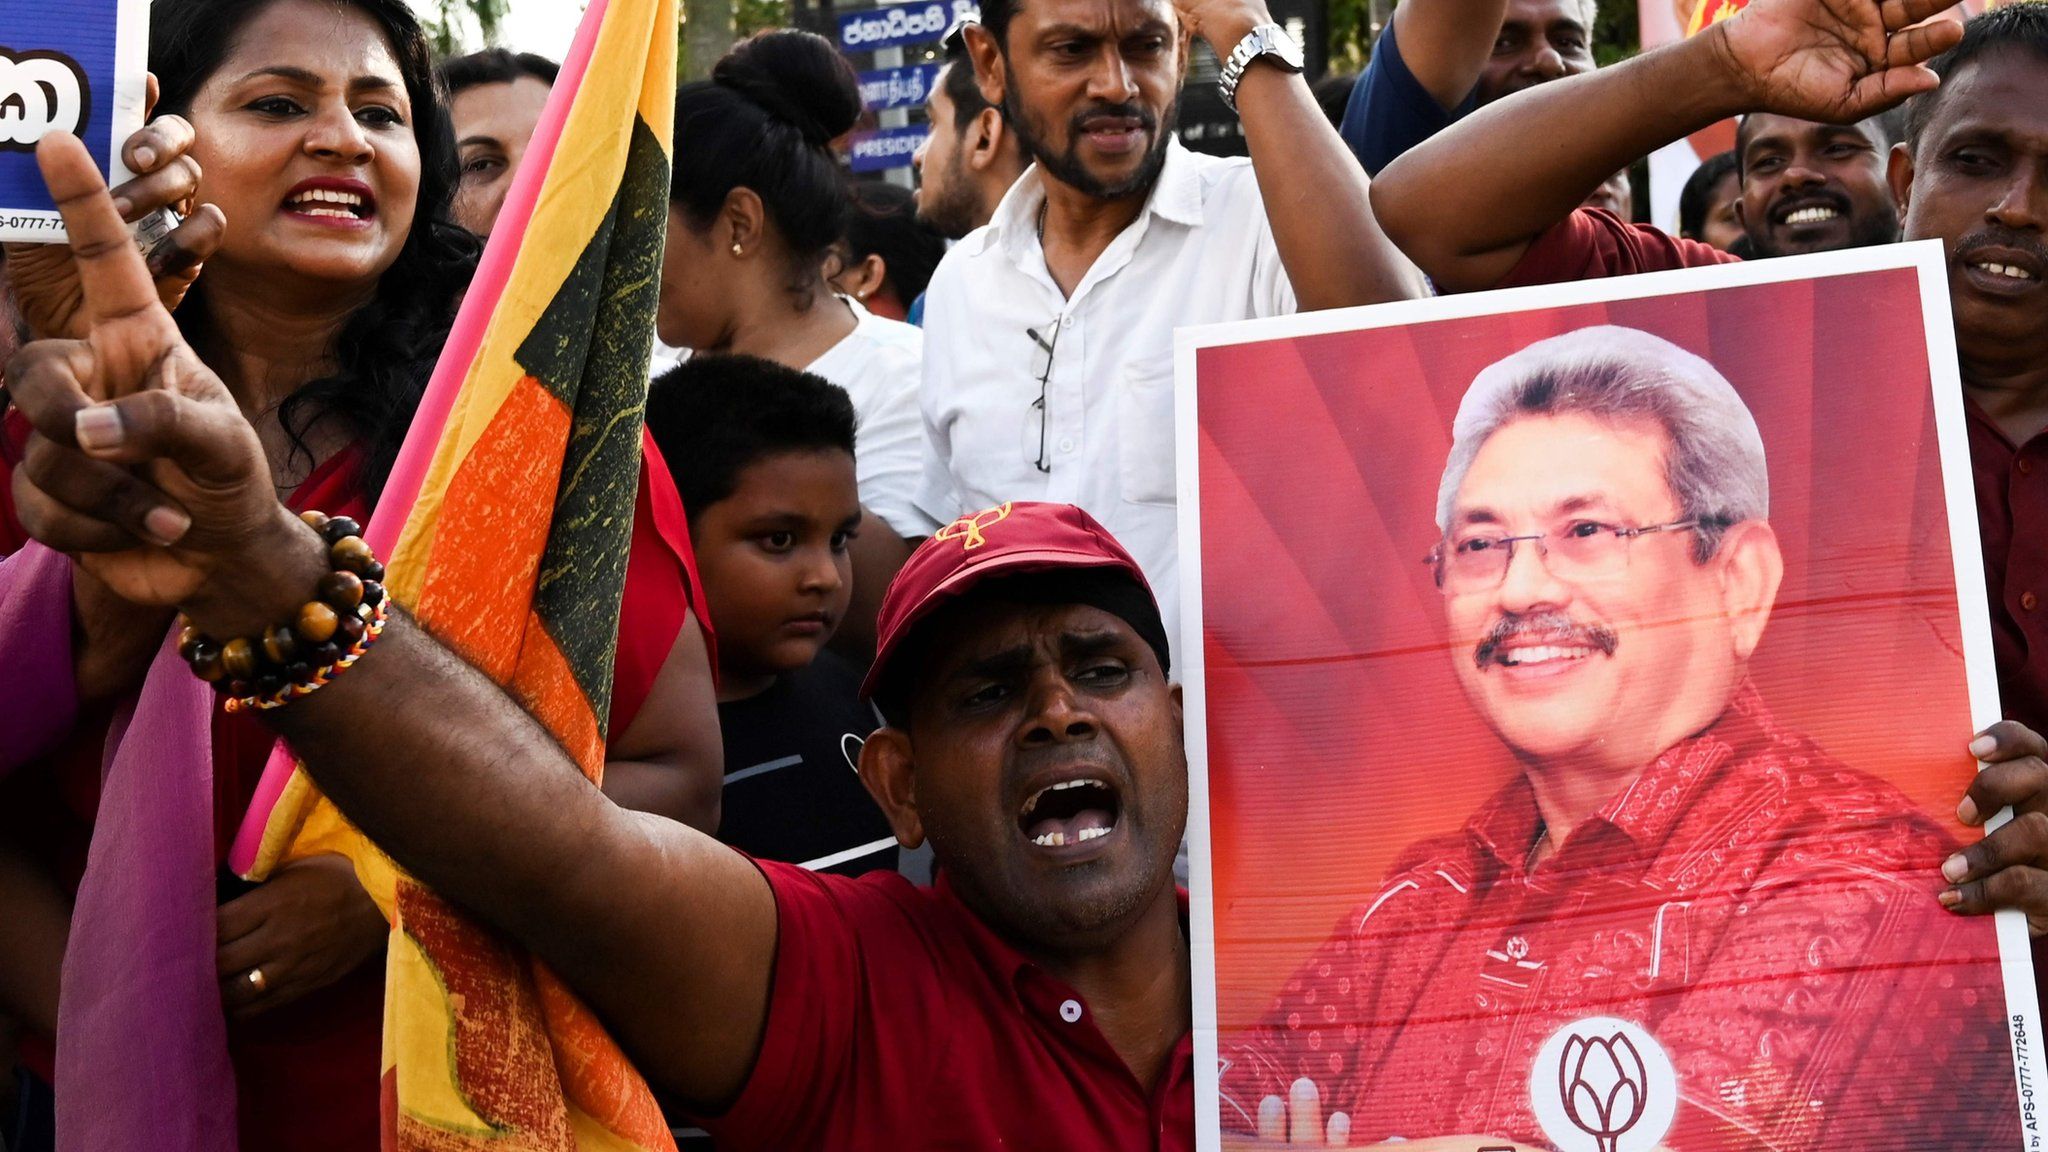 Supporters of Sri Lanka"s President-elect Gotabaya Rajapaksa shout slogans as he leaves the election commission office in Colombo on November 17, 2019.